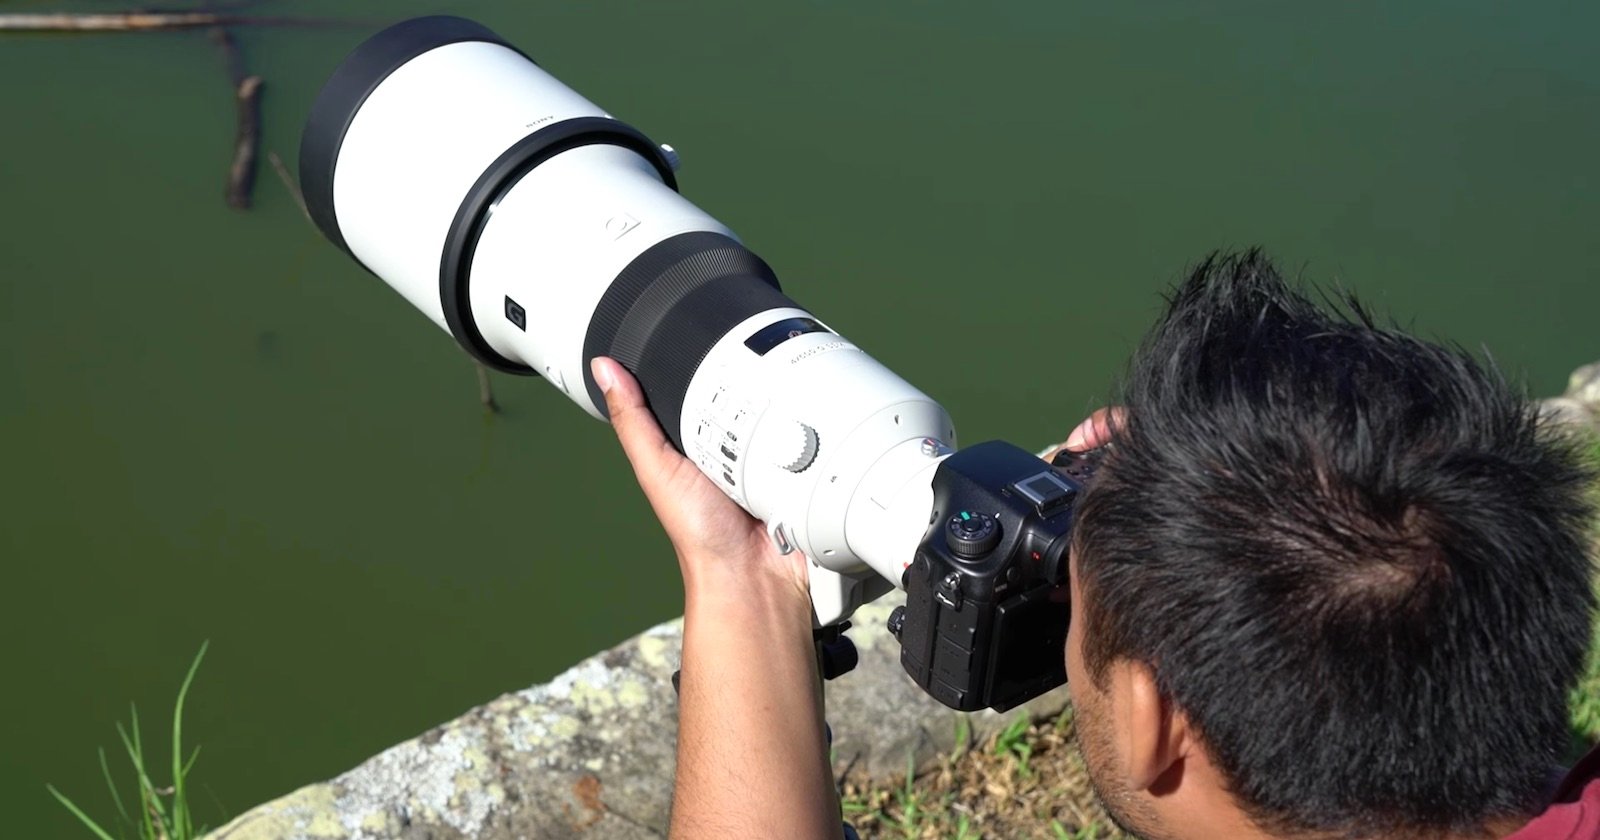 $13,000 Lens Review: Taking the Sony 500mm f/4.0G for a Spin